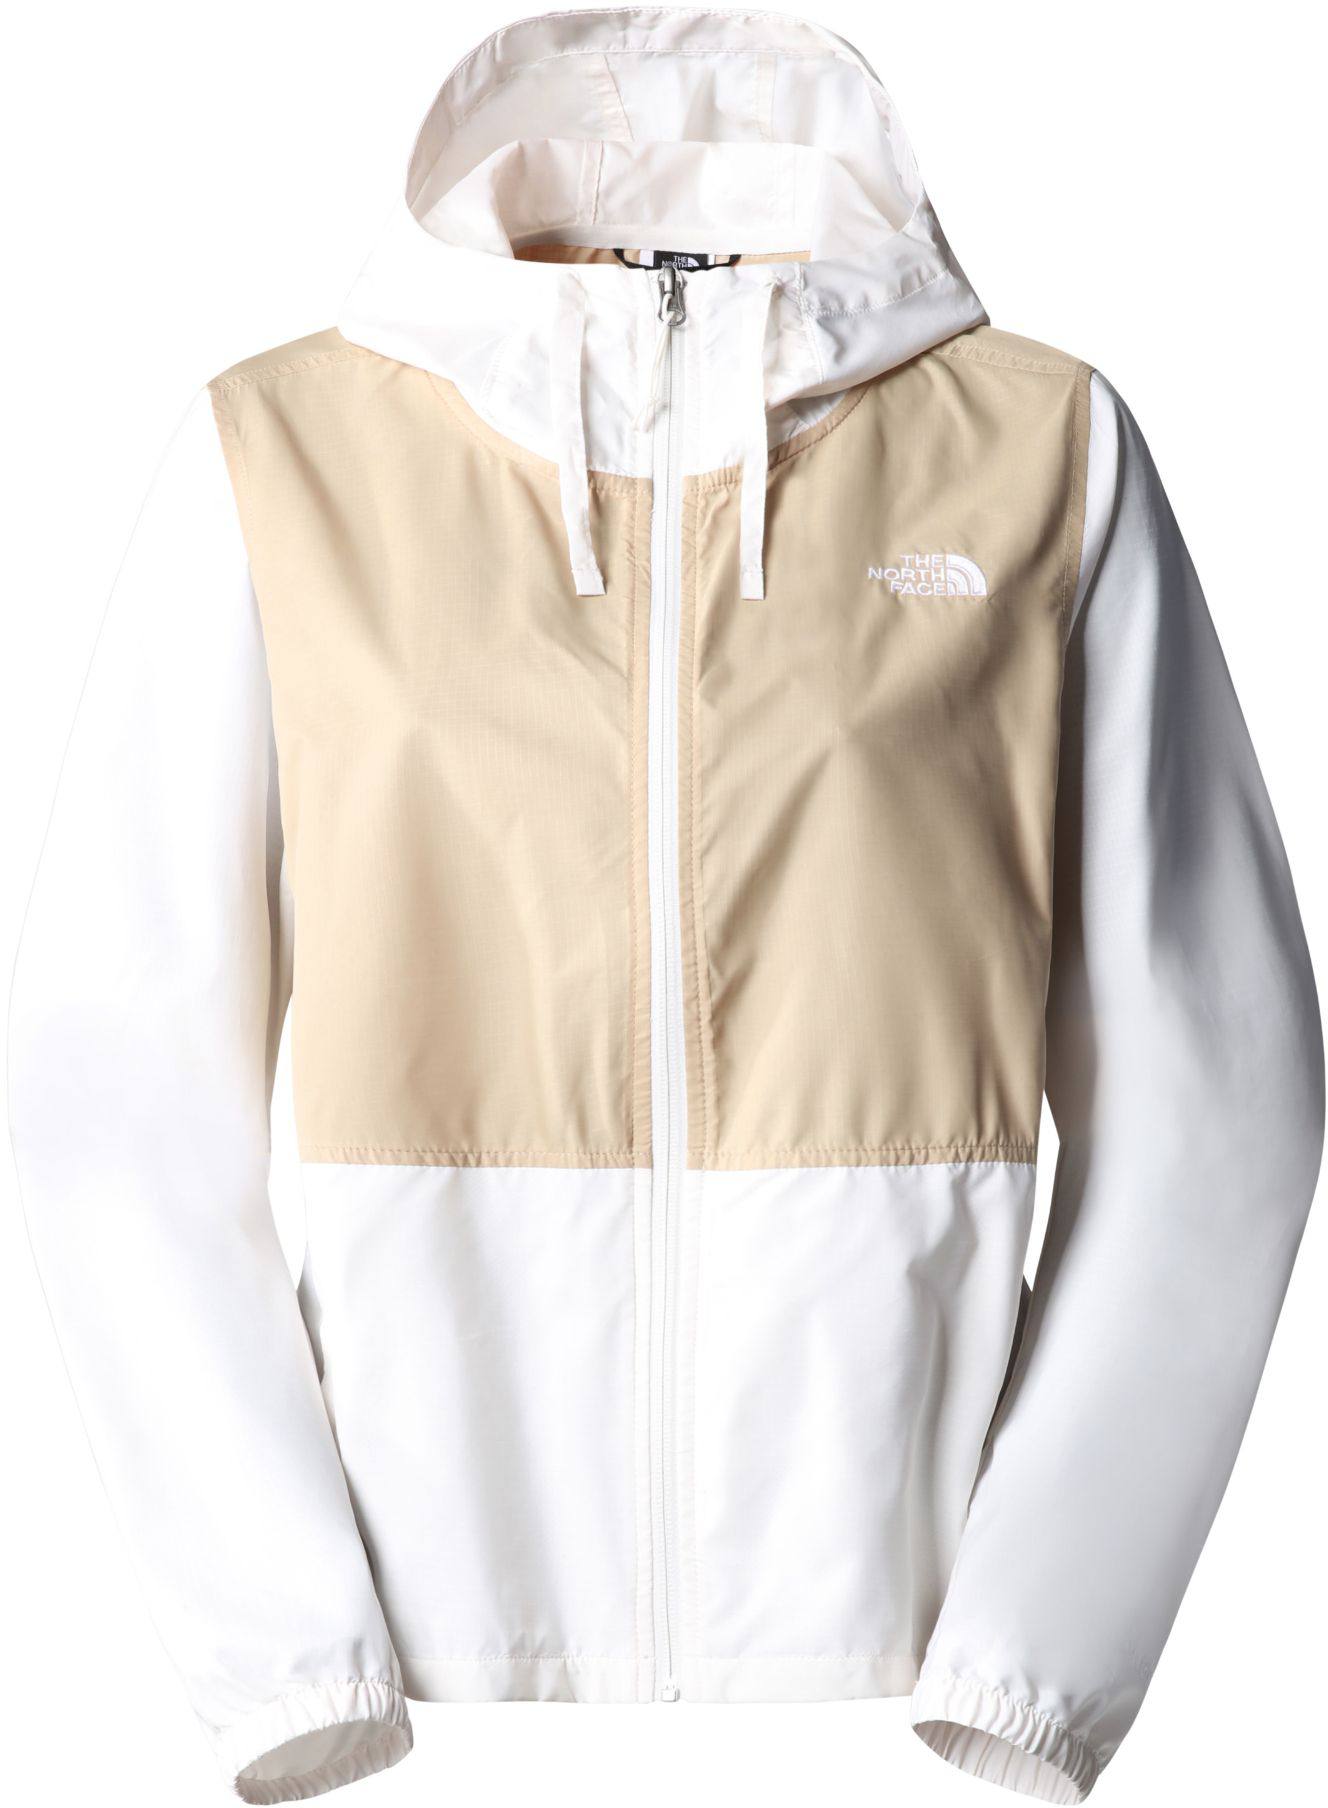 Image of The North Face Women's Cyclone 3 Jacket